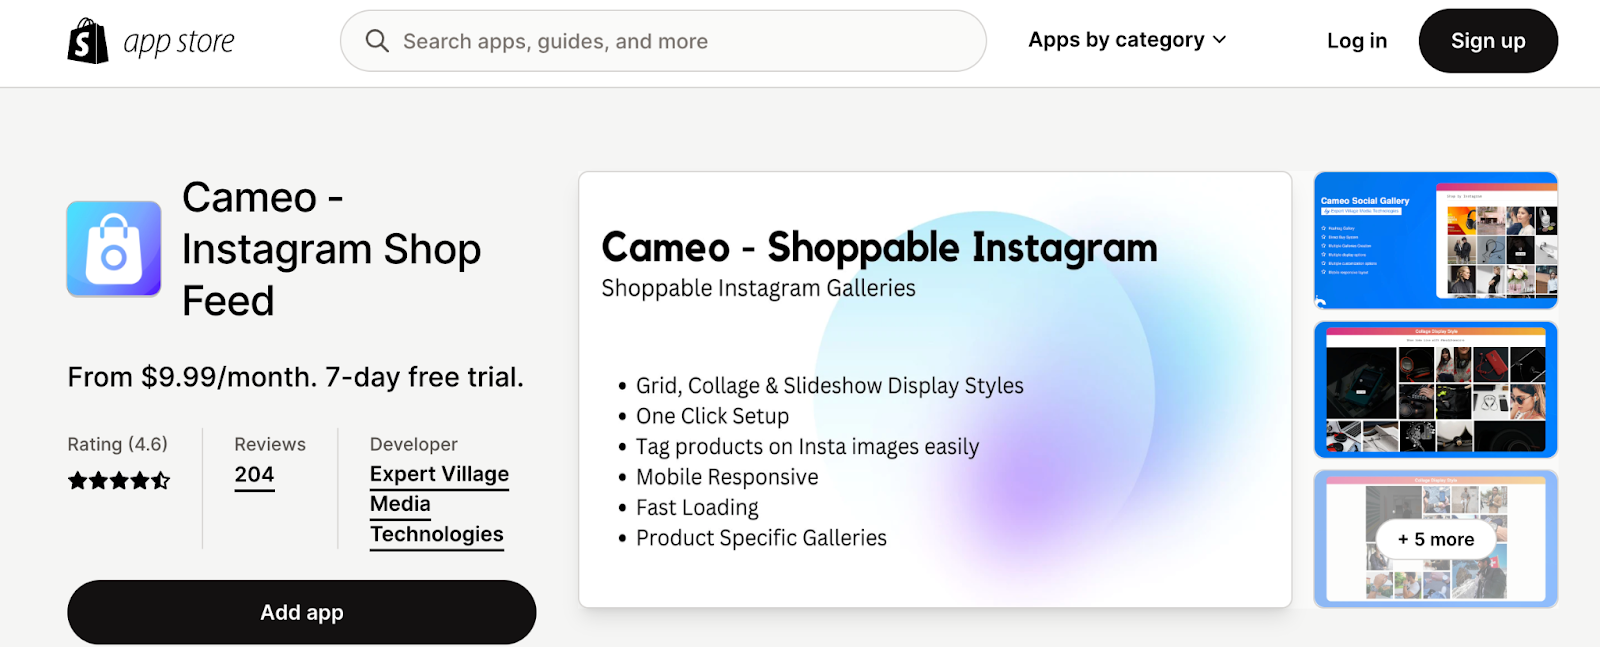 best shopify apps for instagram - Cameo - Instagram Shop Feed